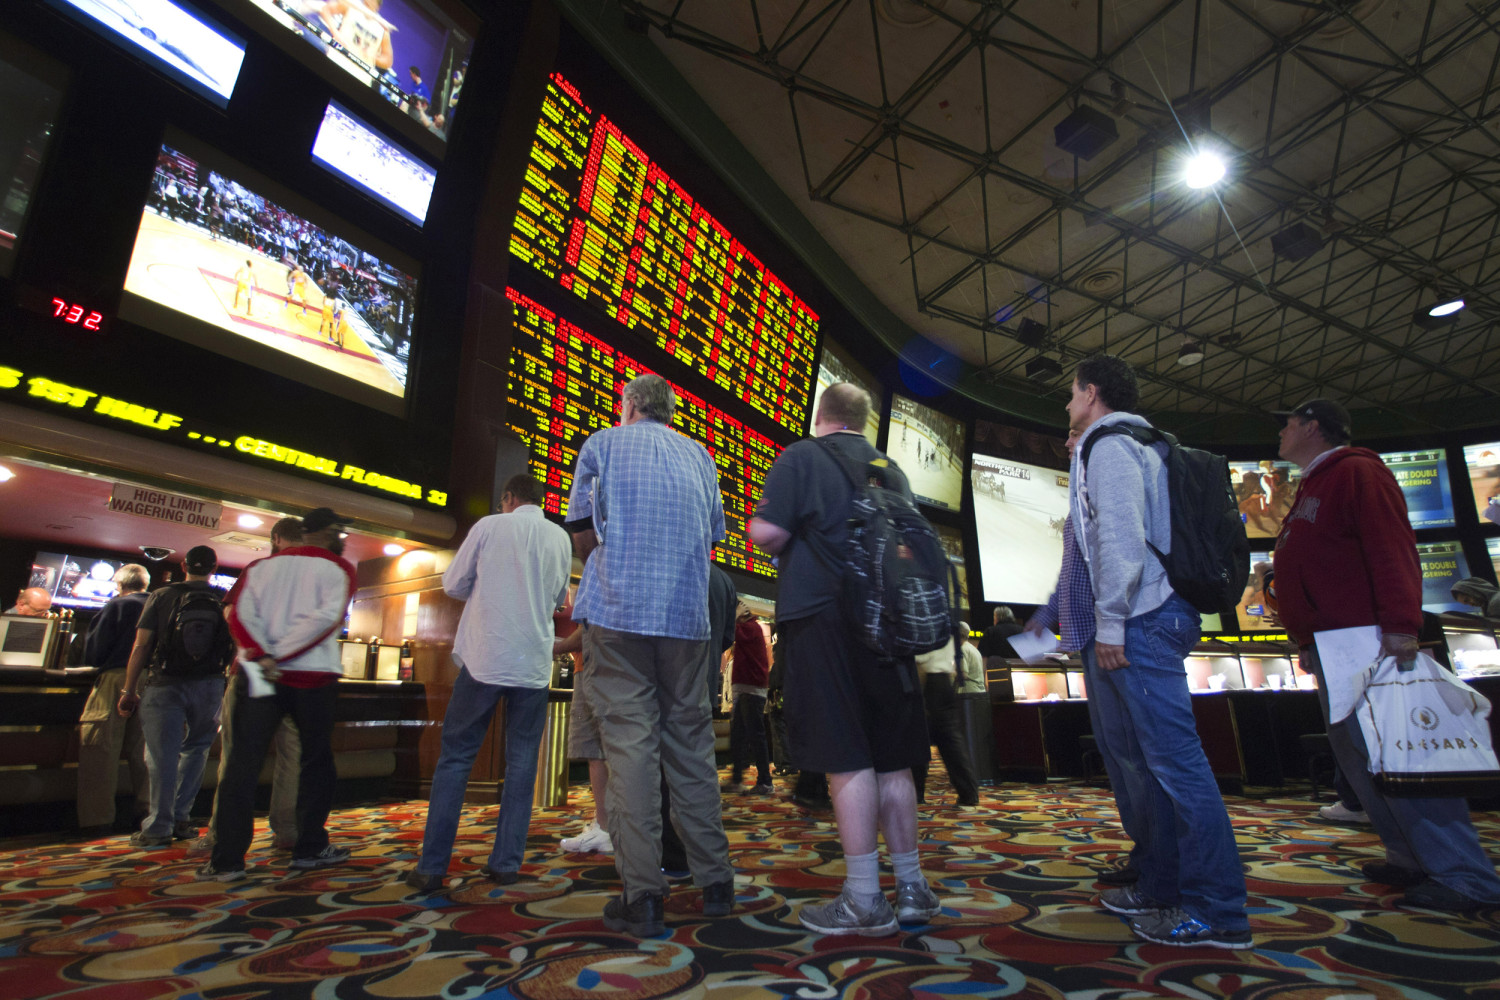 Supreme Court likely to rule states can allow sports betting